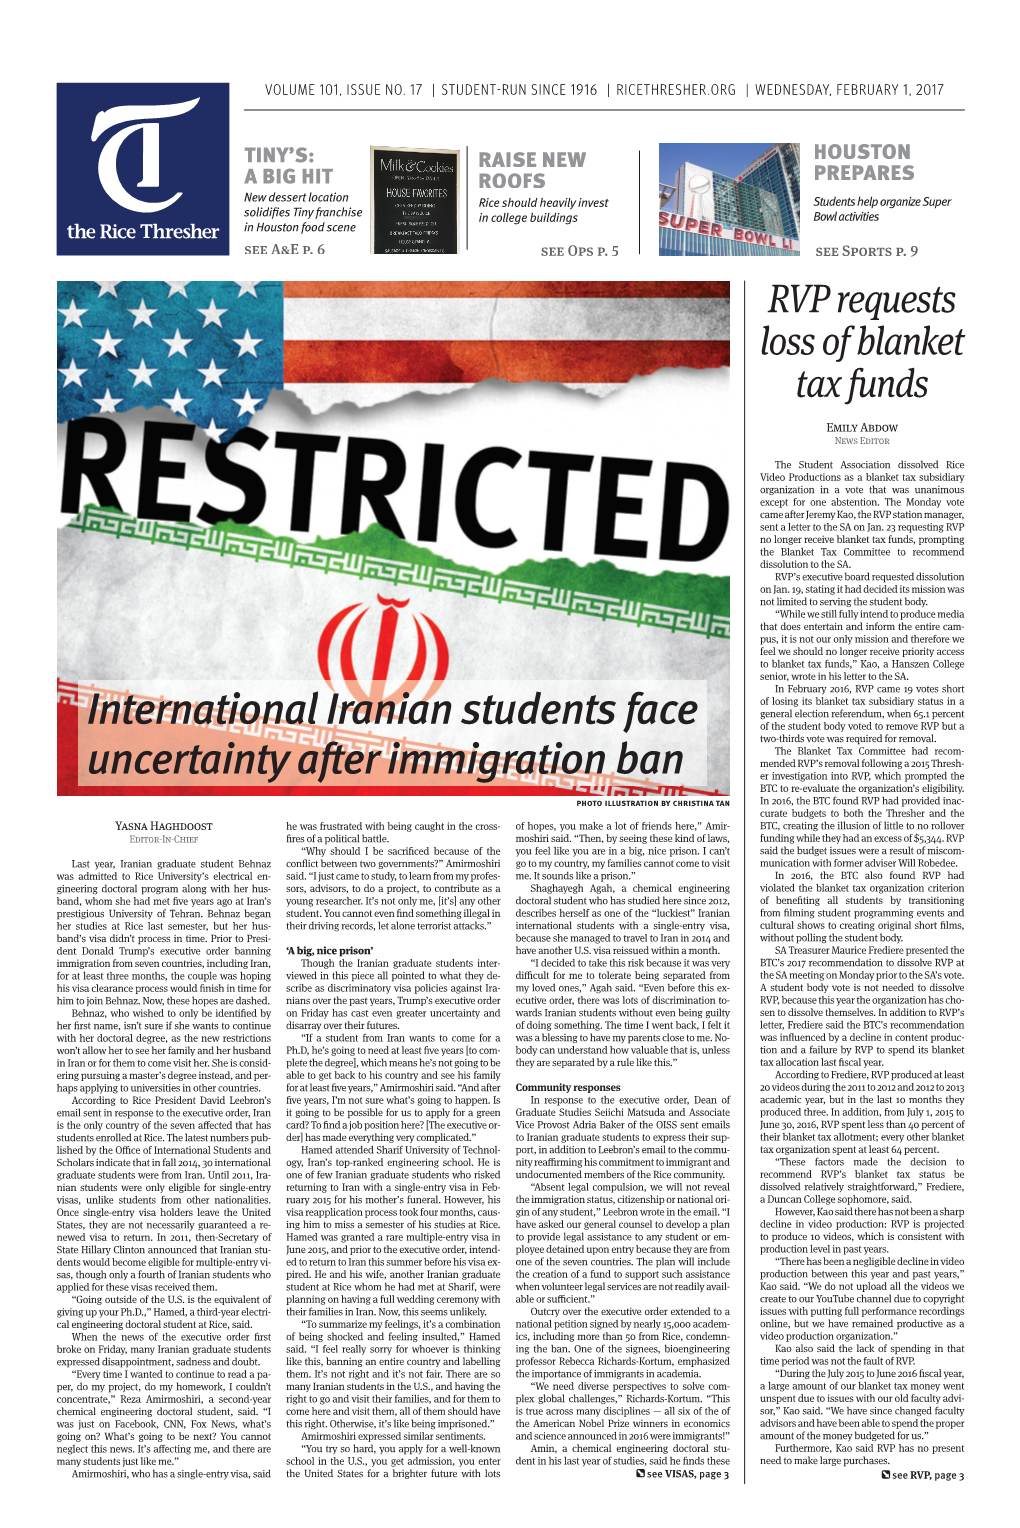 International Iranian Students Face Uncertainty After Immigration